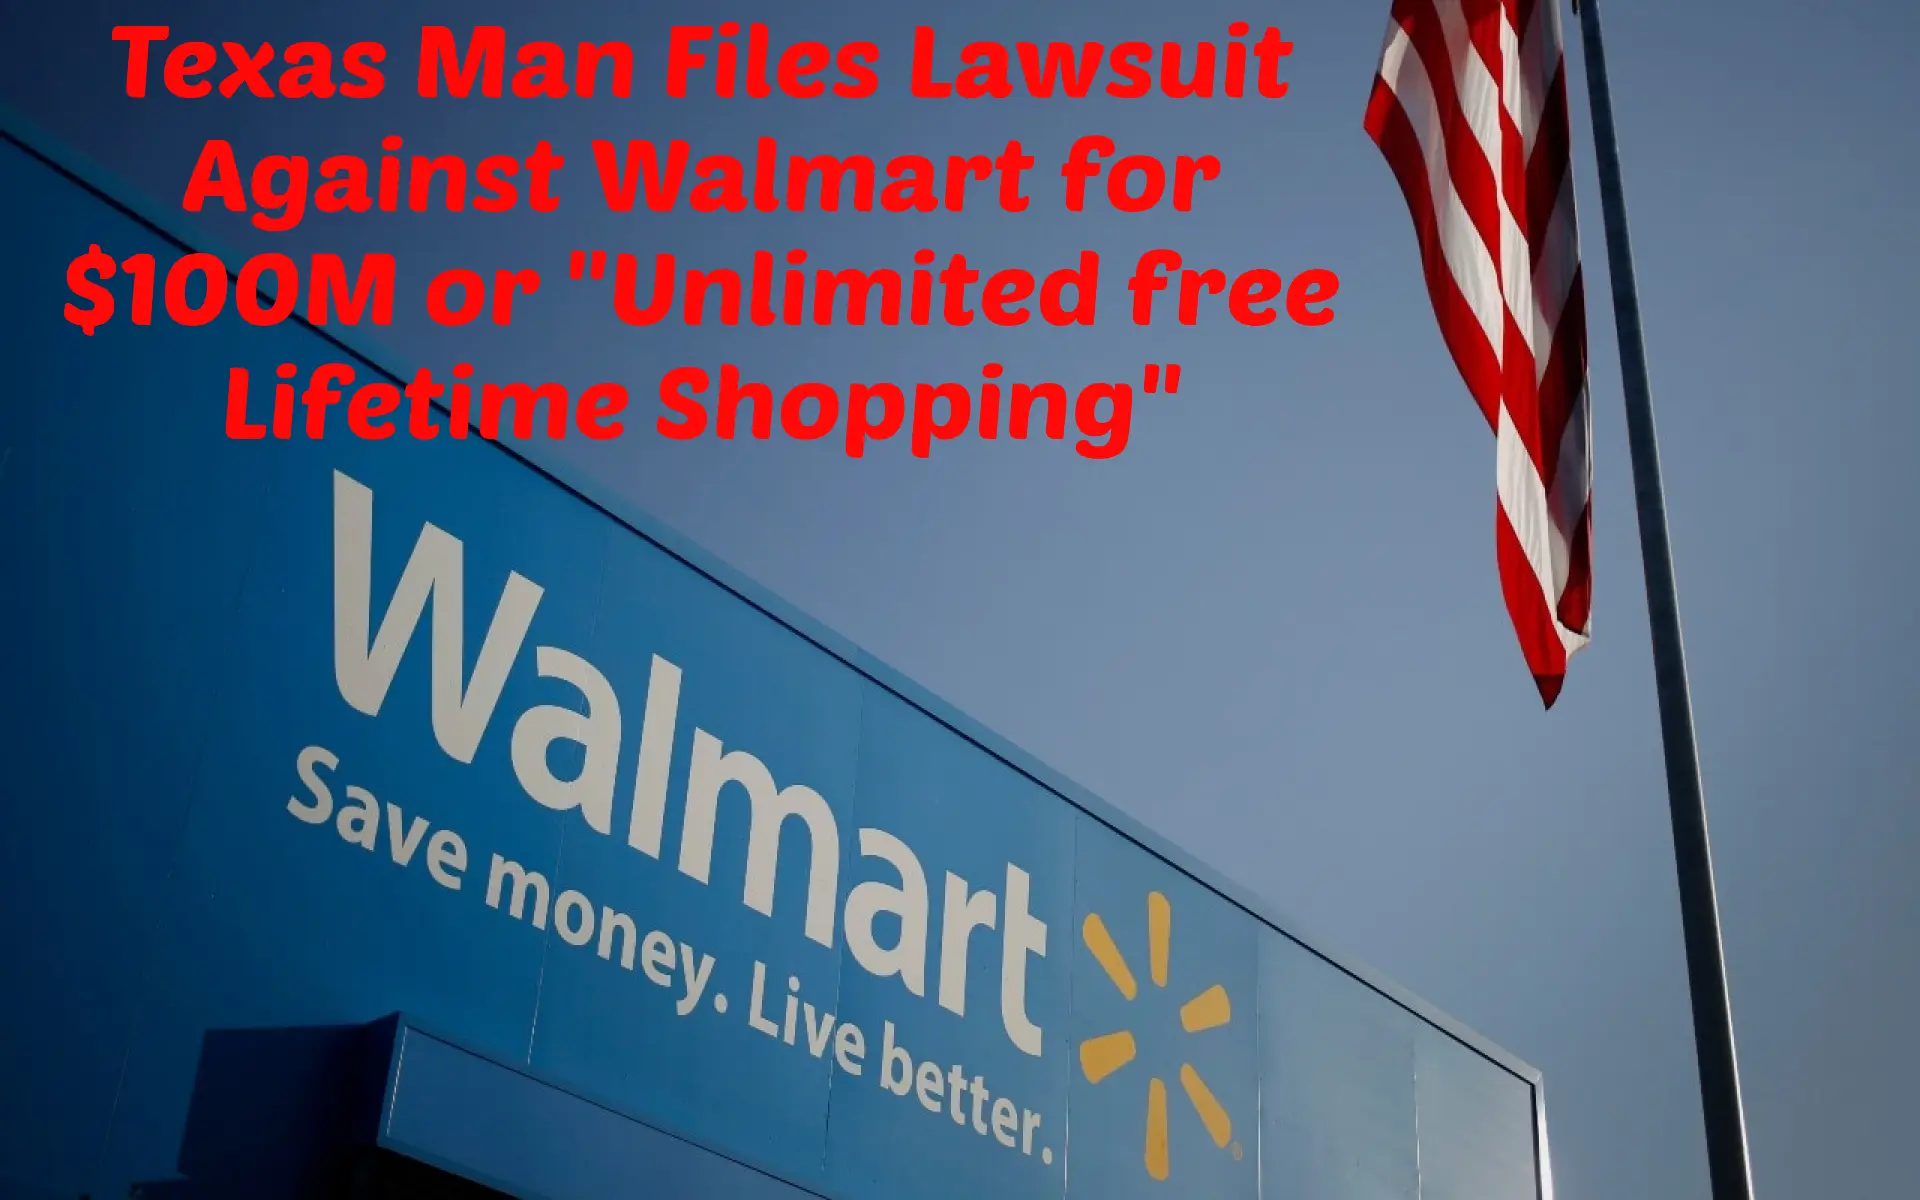 Lawsuit Against Walmart For $100m Or Unlimited Free Lifetime Shopping